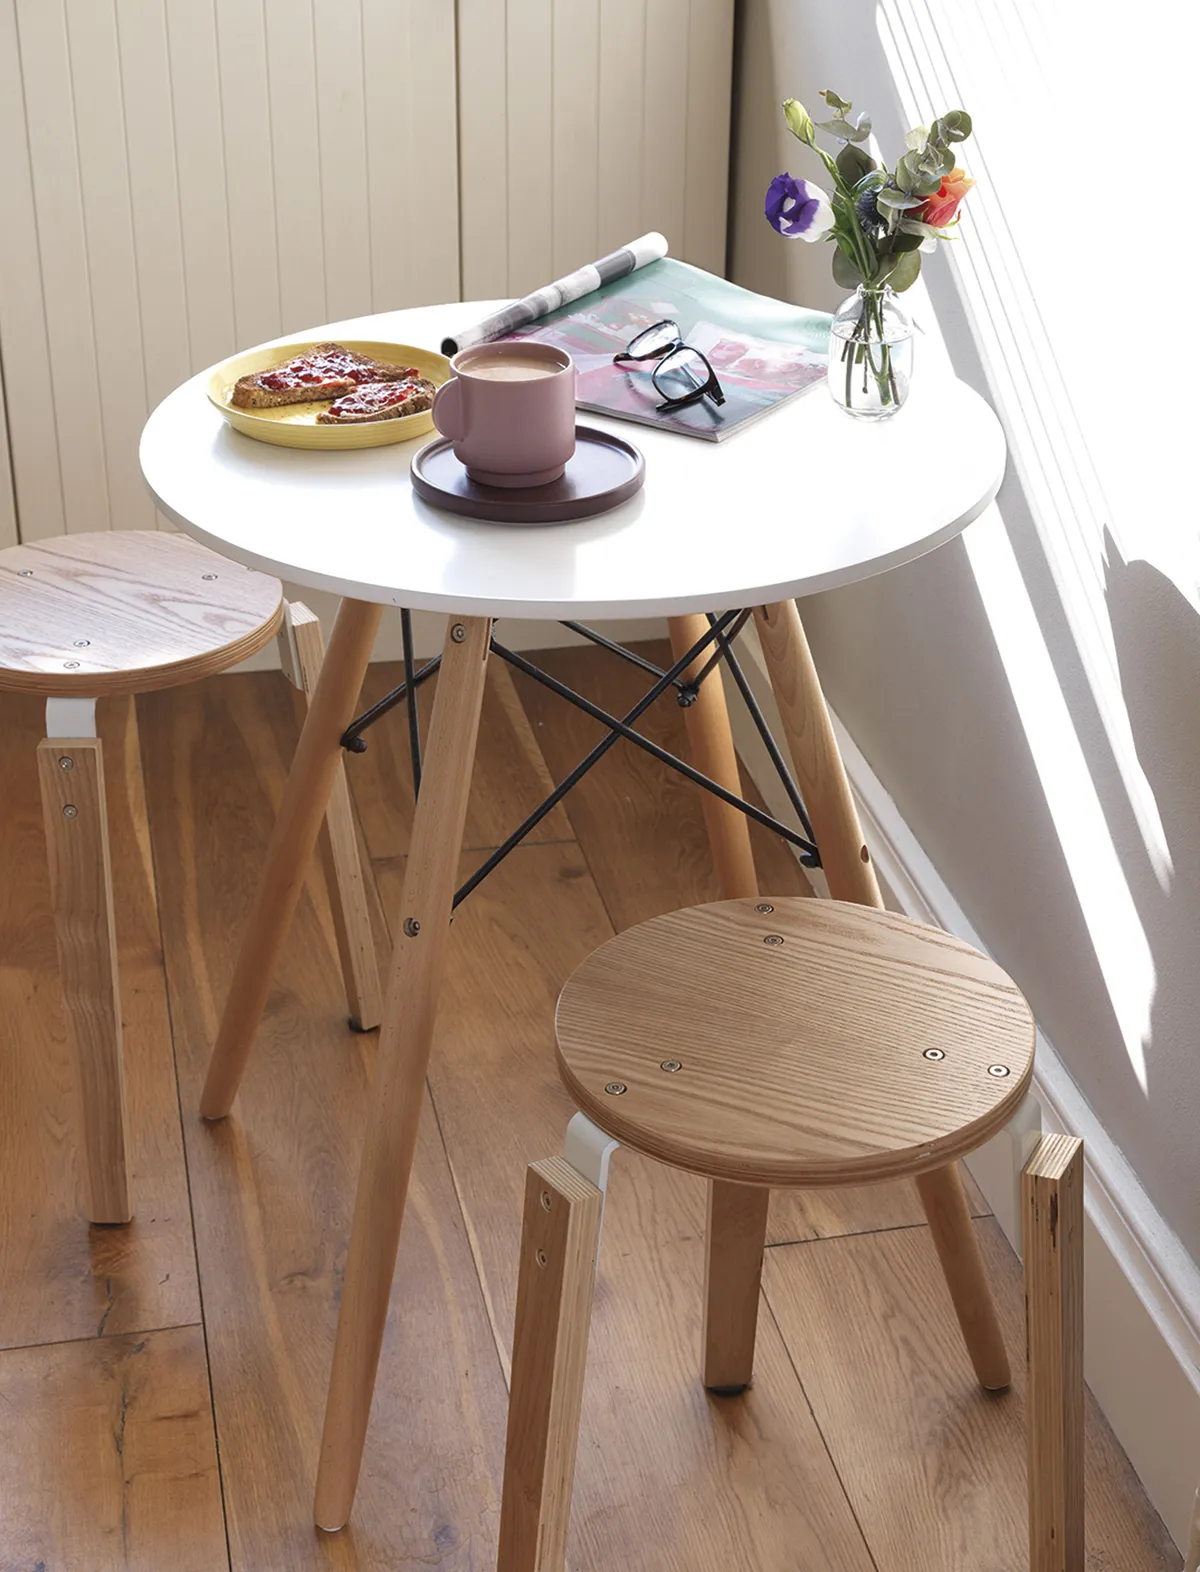 ‘I bought this little bistro table before we moved in. I saw it had been reduced at Cox & Cox so snapped it up. I love sitting here, enjoying a coffee and reading through the papers at the weekend, with the sun streaming through the window,’ says Emily